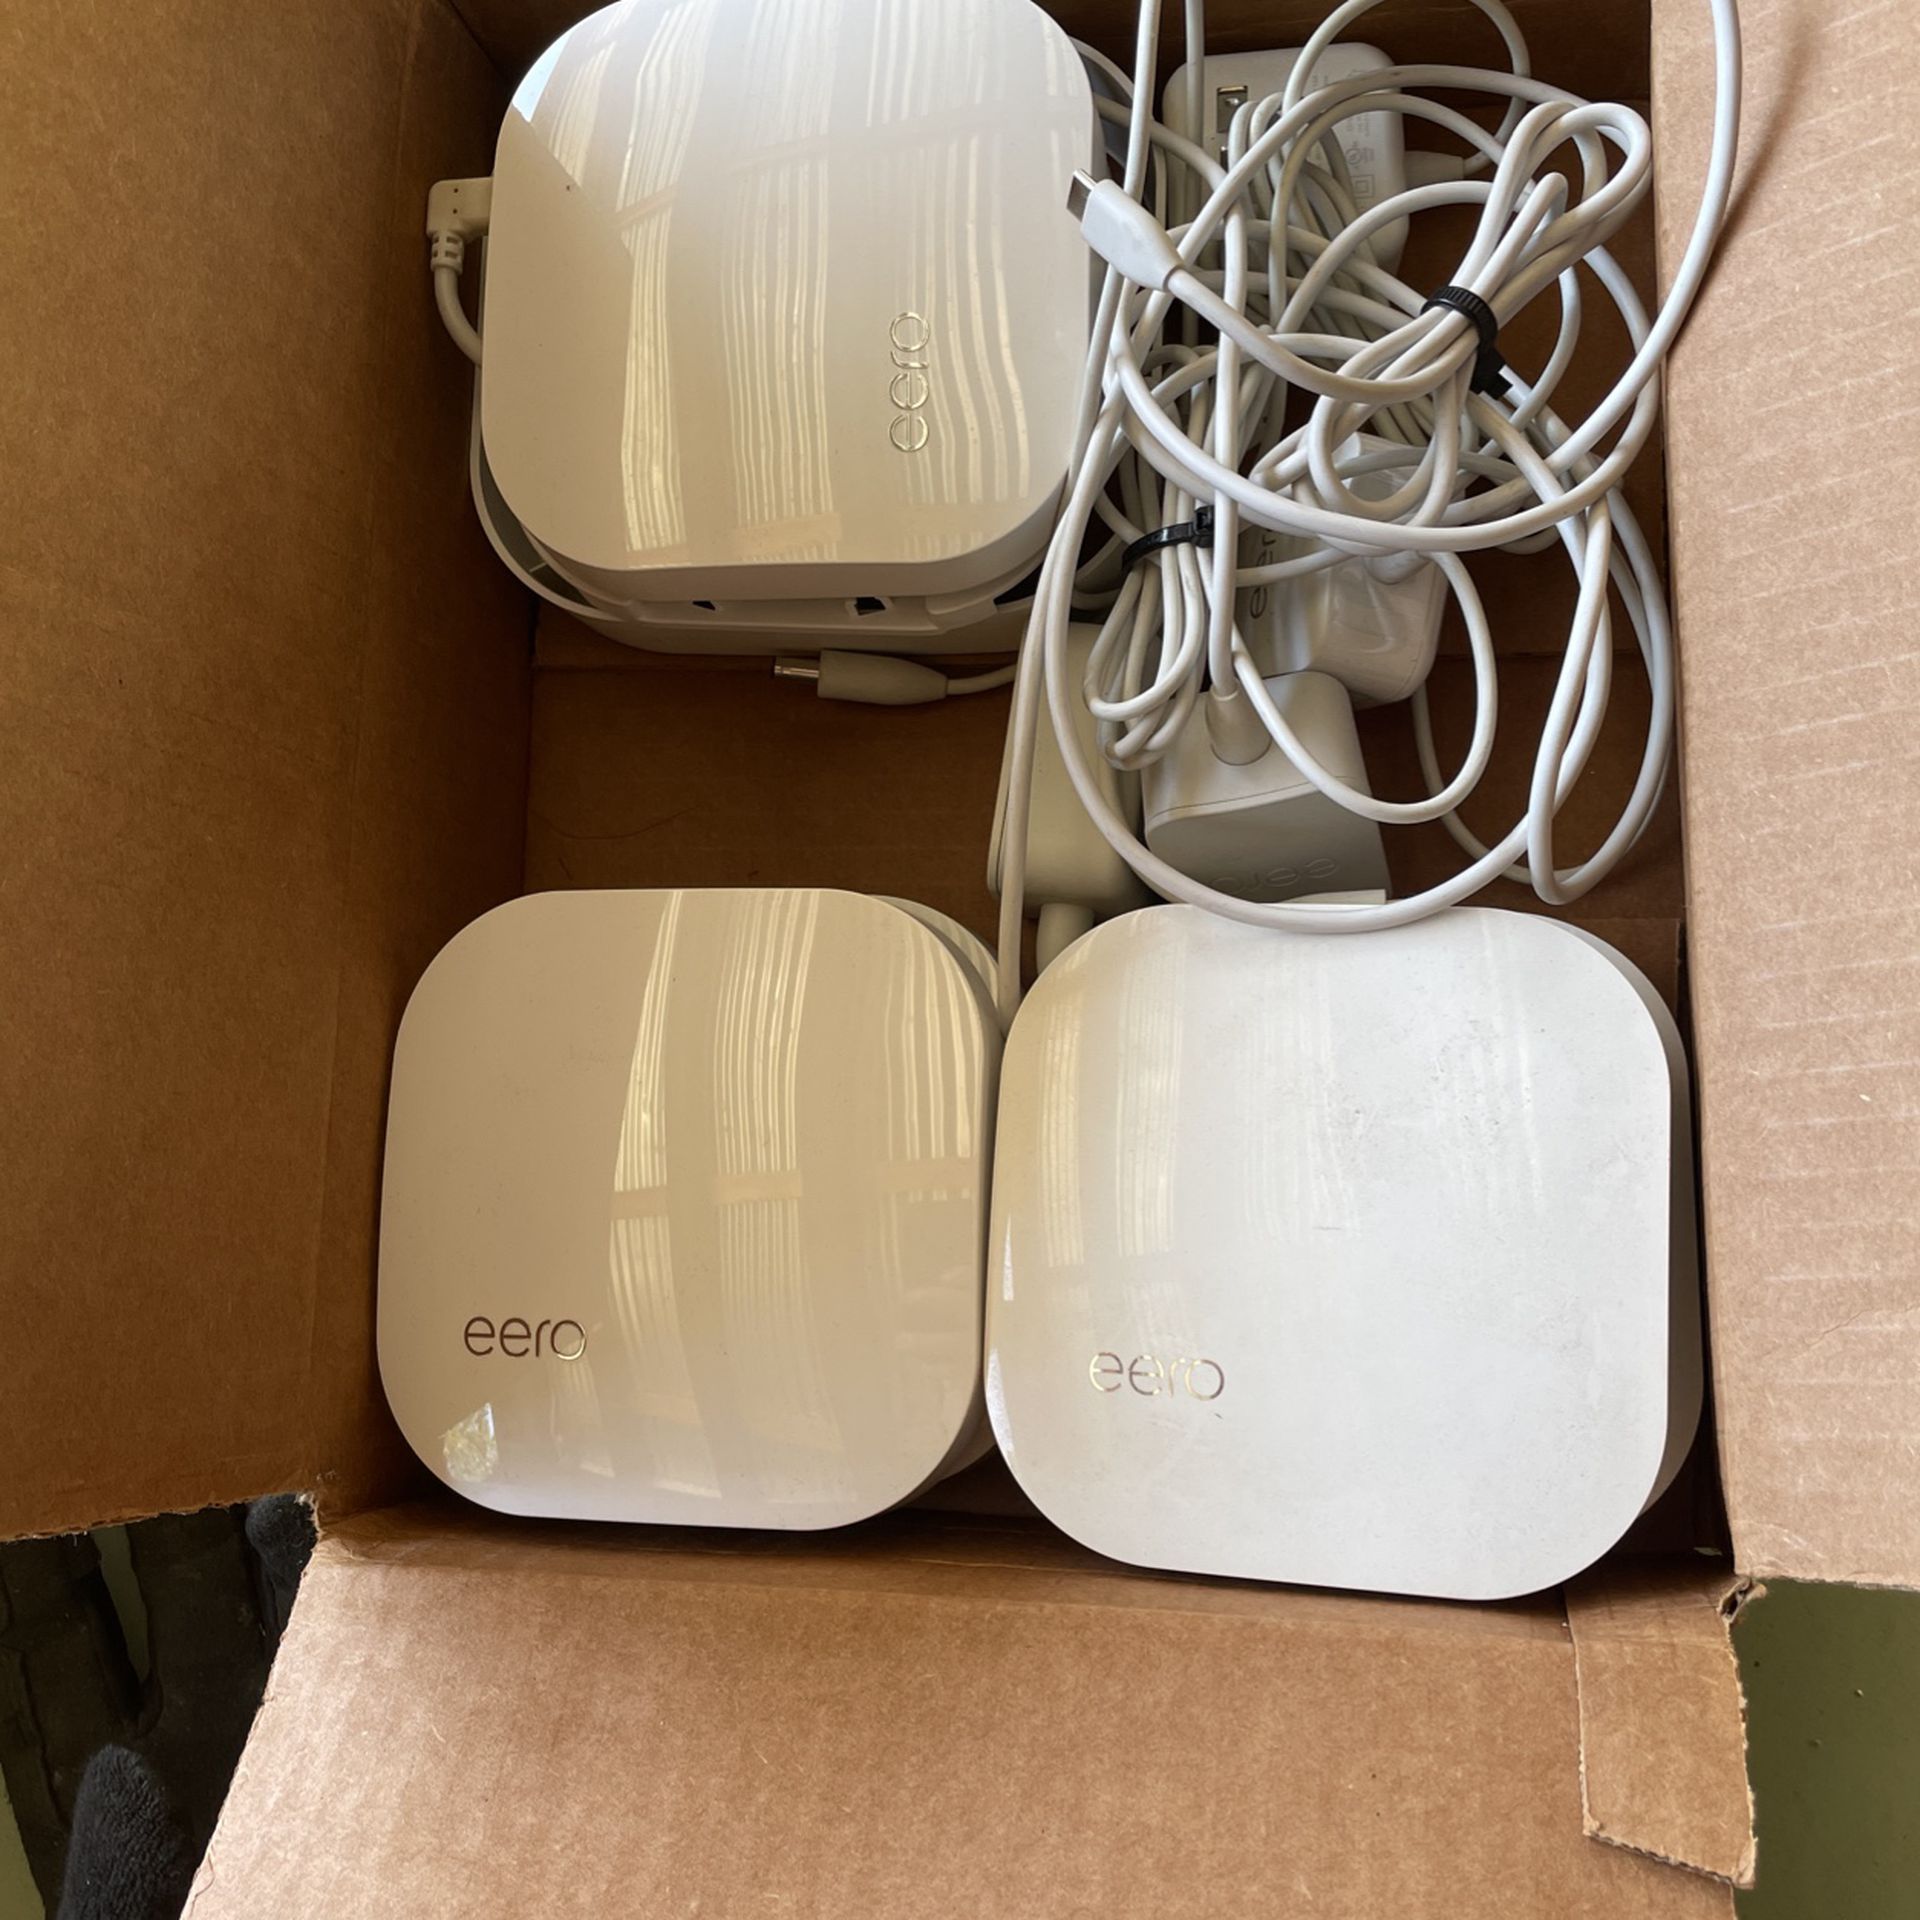 Eero Router And 4 Beacons!